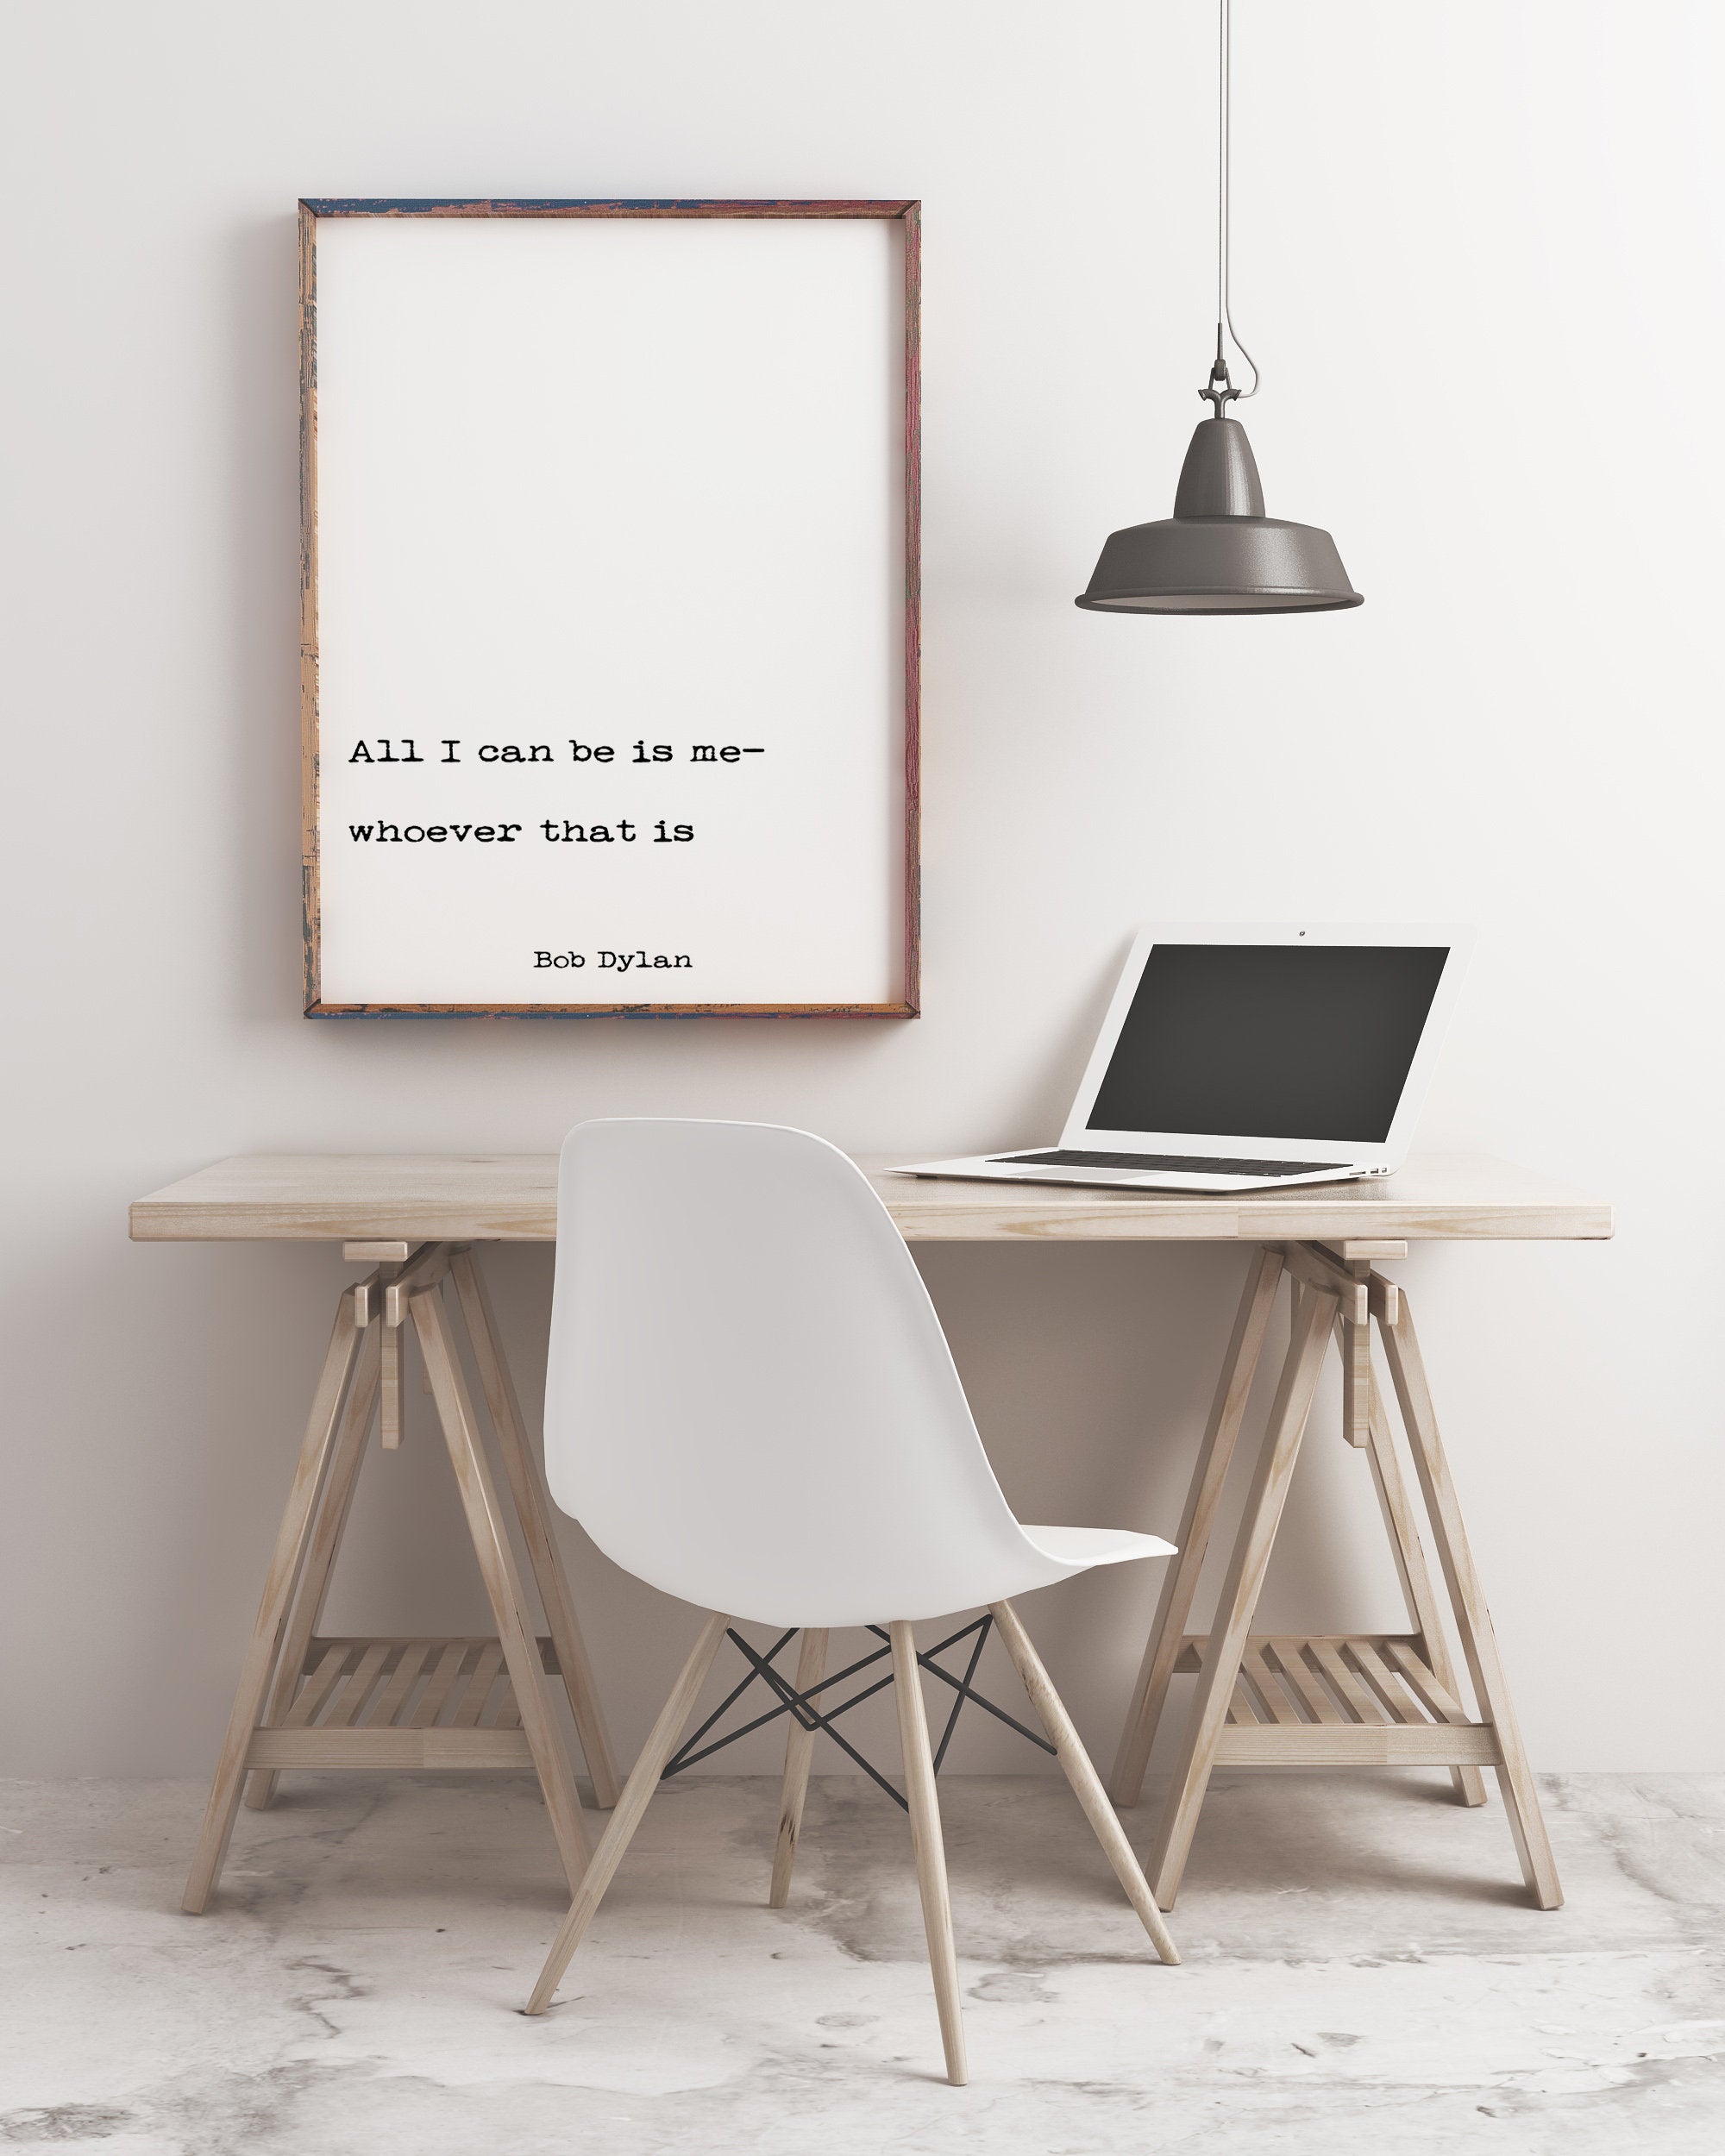 Bob Dylan Quote Print, All I Can Be Is Me Whoever That Is Print - BookQuoteDecor